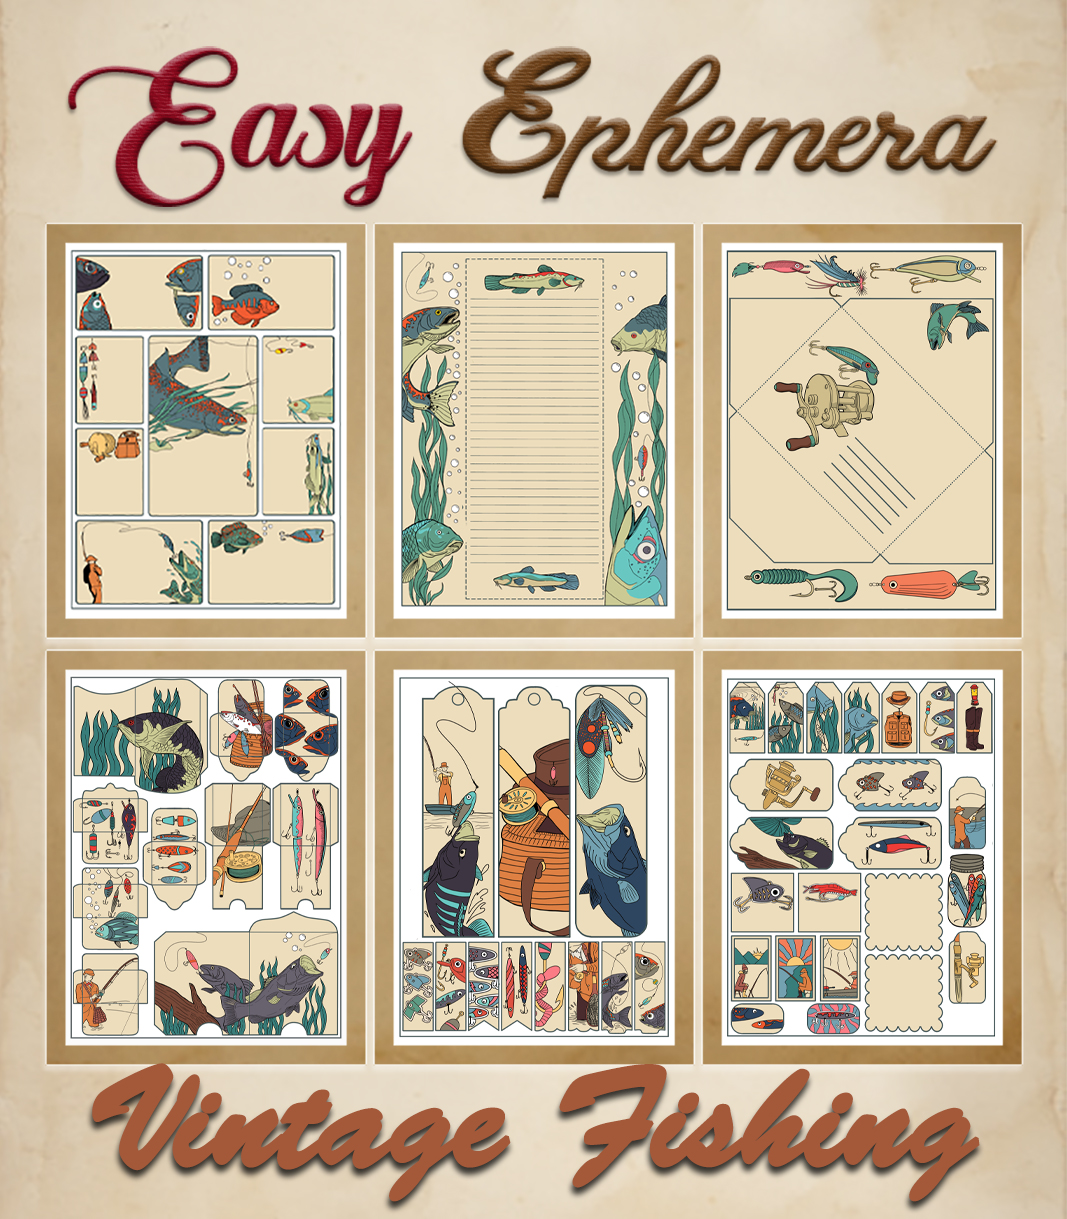 a complete image showing smaller images of all the full color pages in a package with the title of the product "Easy Ephemera - Vintage Fishing"